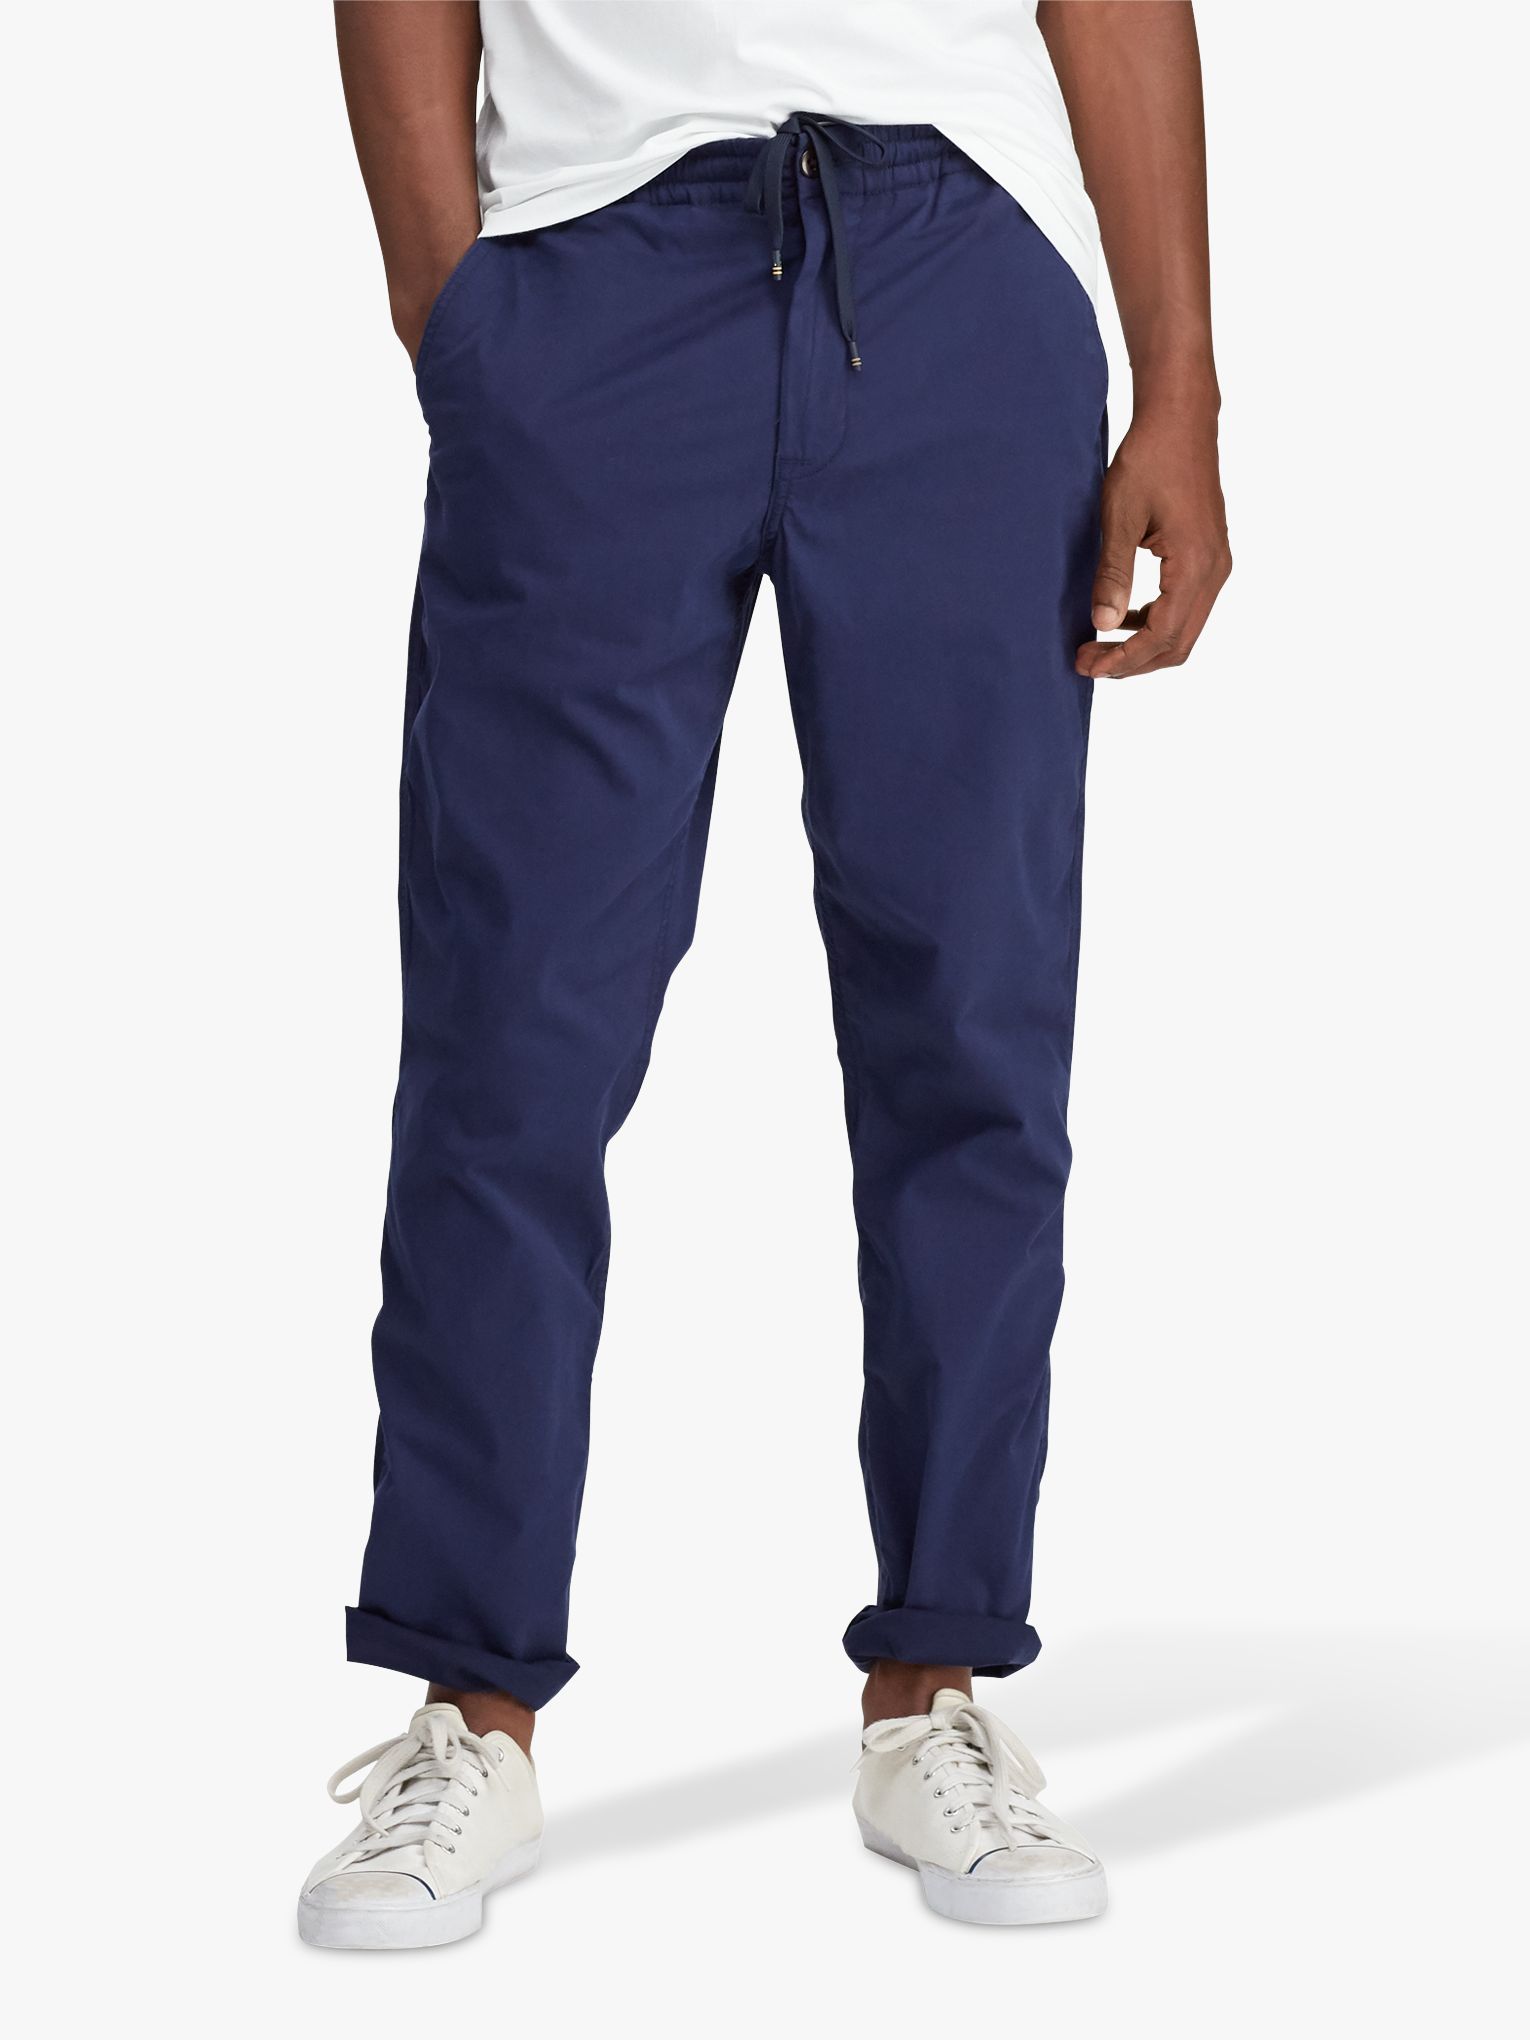 Polo Ralph Lauren Prepster Trousers at John Lewis & Partners